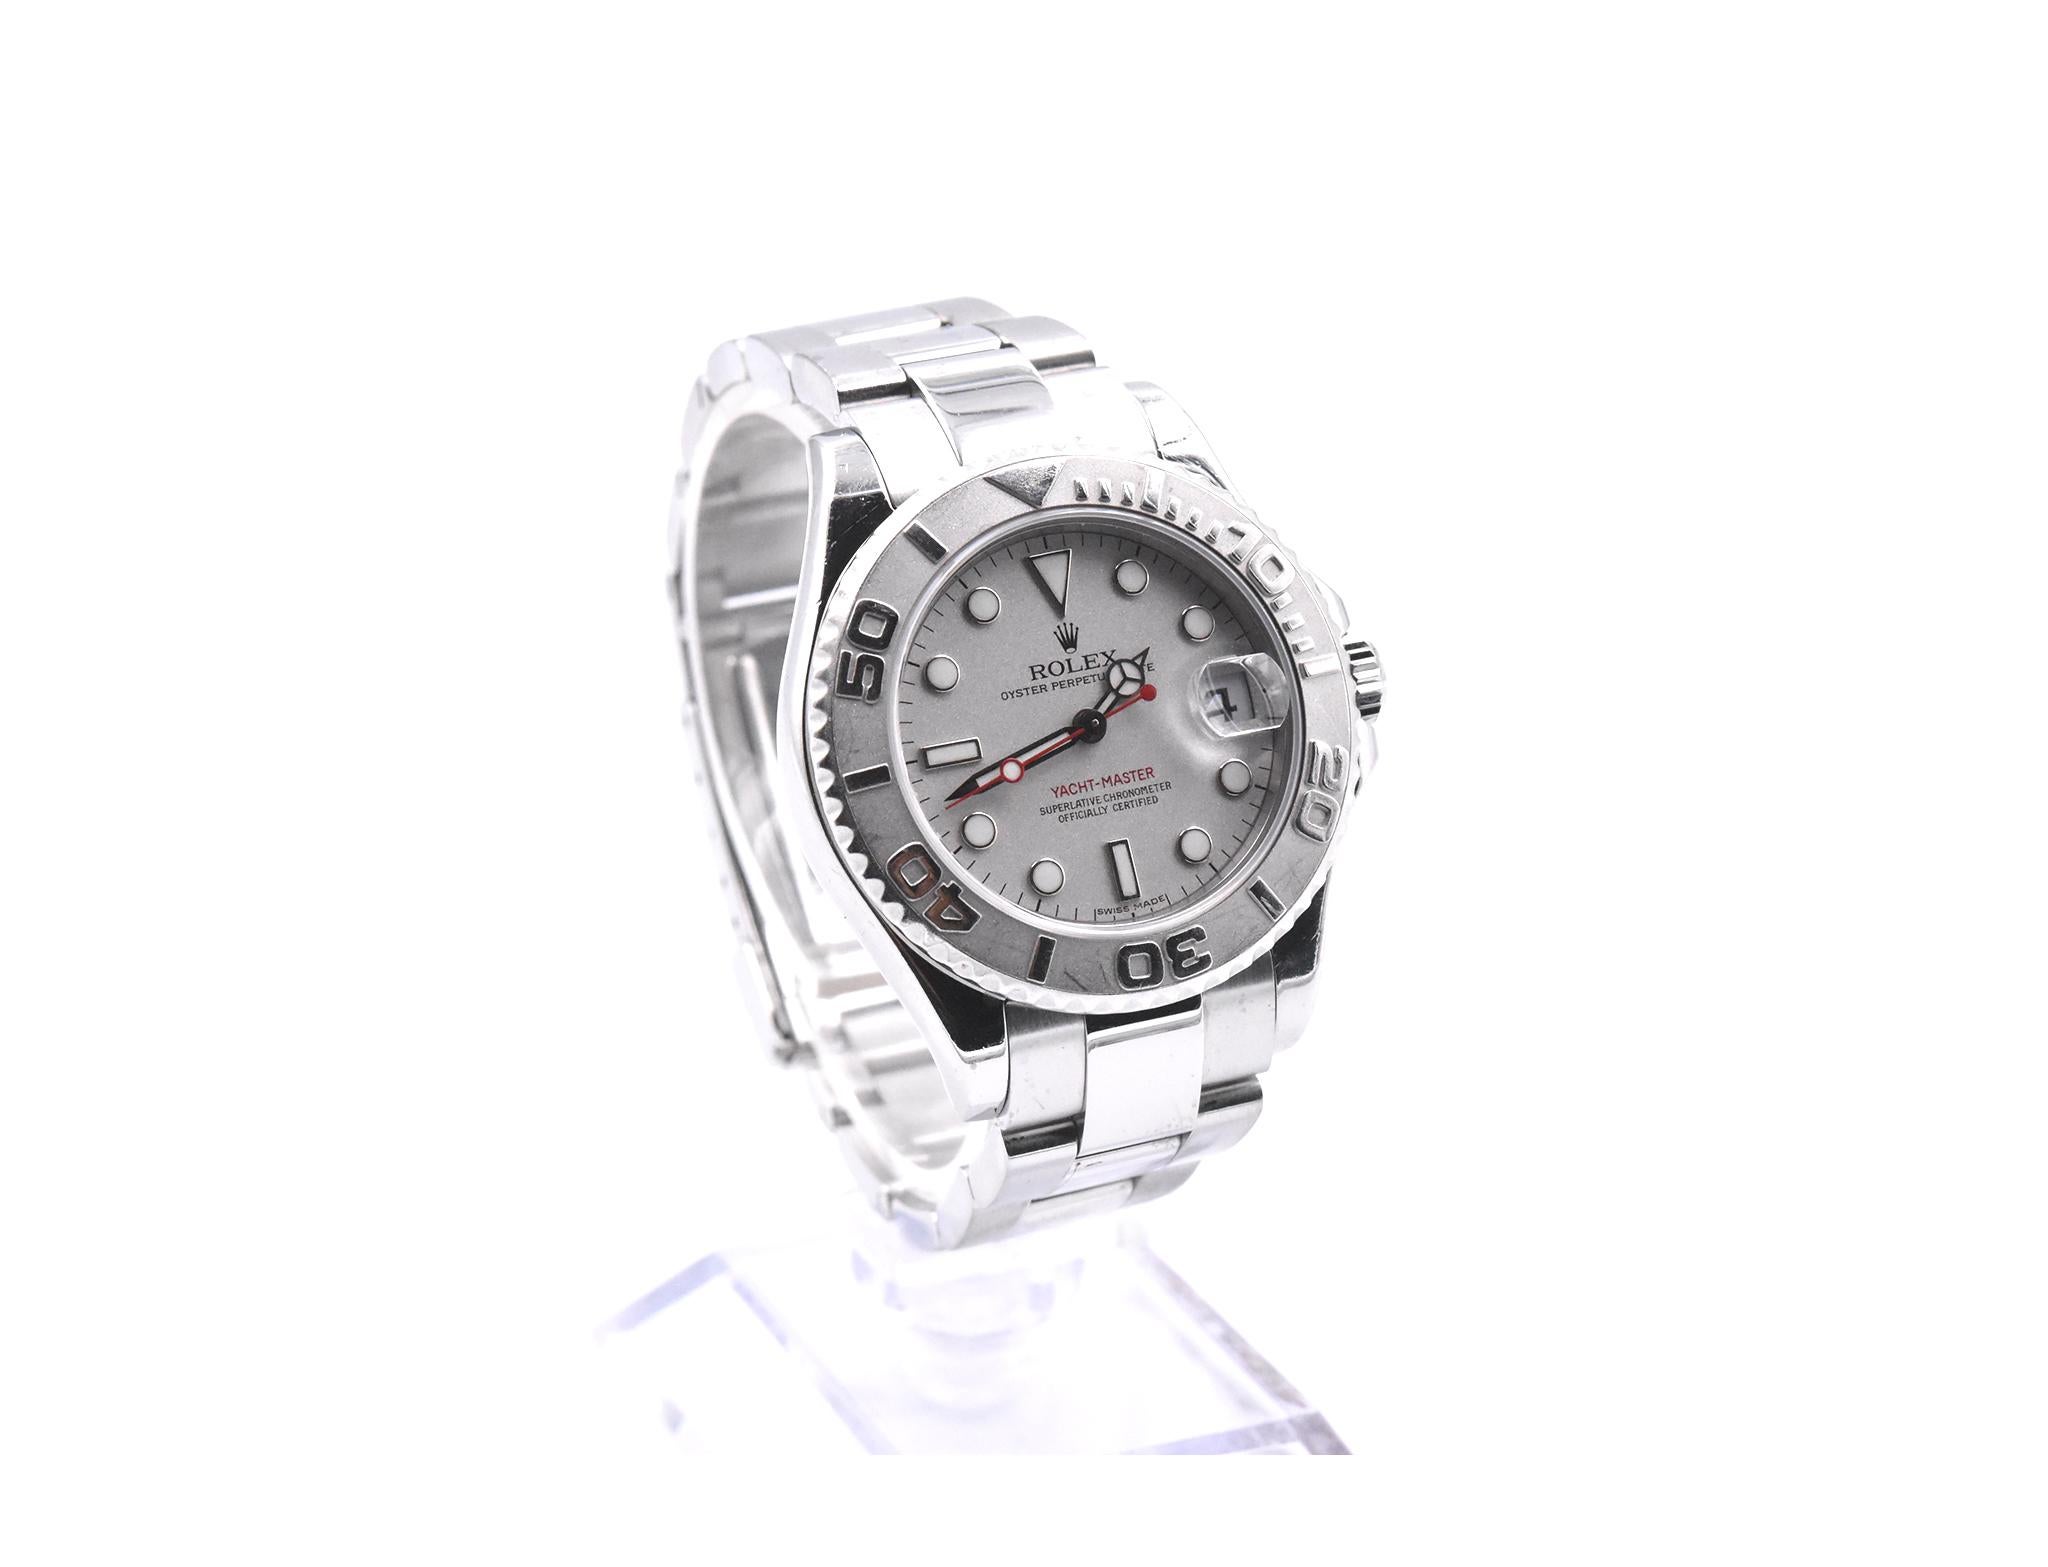 Movement: automatic
Function: hours, minutes, seconds, date
Case: round 35mm stainless steel case with bi-directional bezel, sapphire protective crystal, screw-down crown, water resistant to 100 meters
Dial: silver dial with luminescent steel hands,